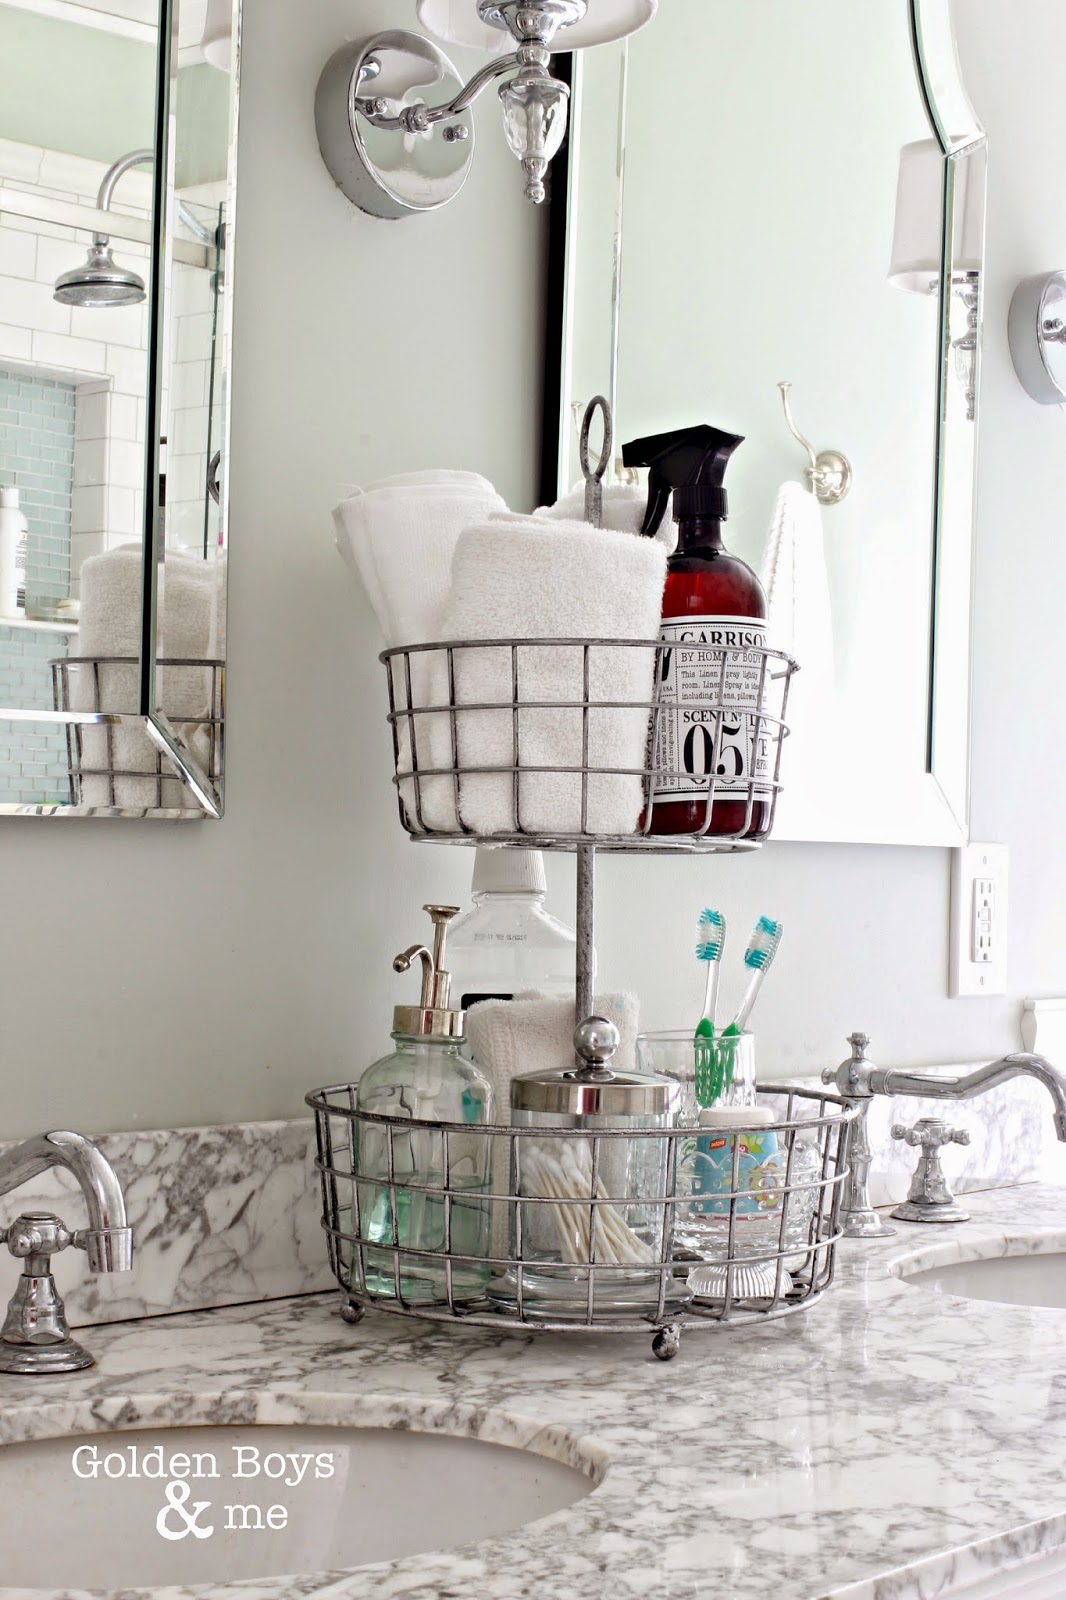 Metal baskets to organize toothbrushes on a washbasin